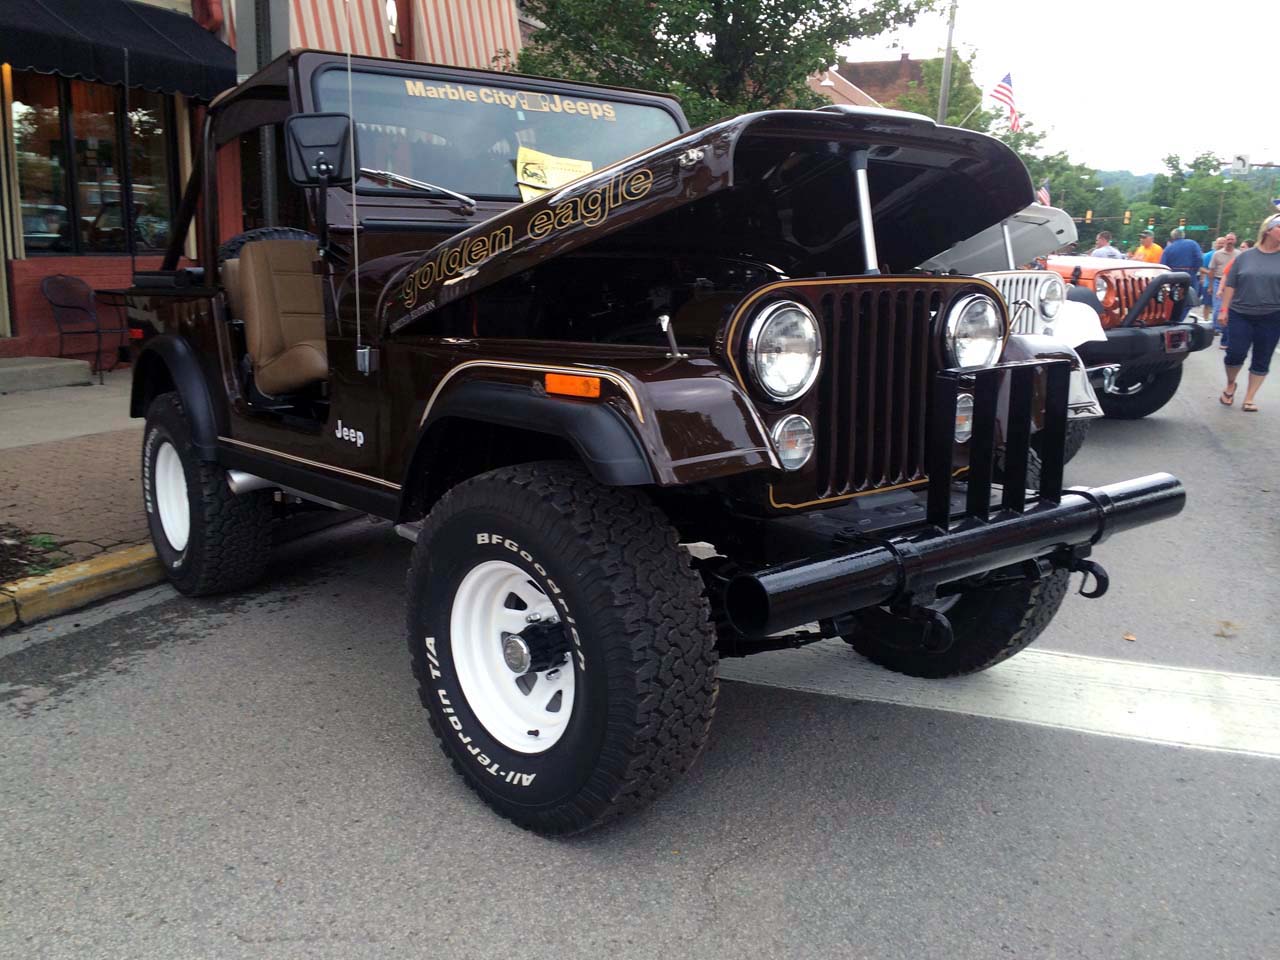 Butler jeep festival pictures #5